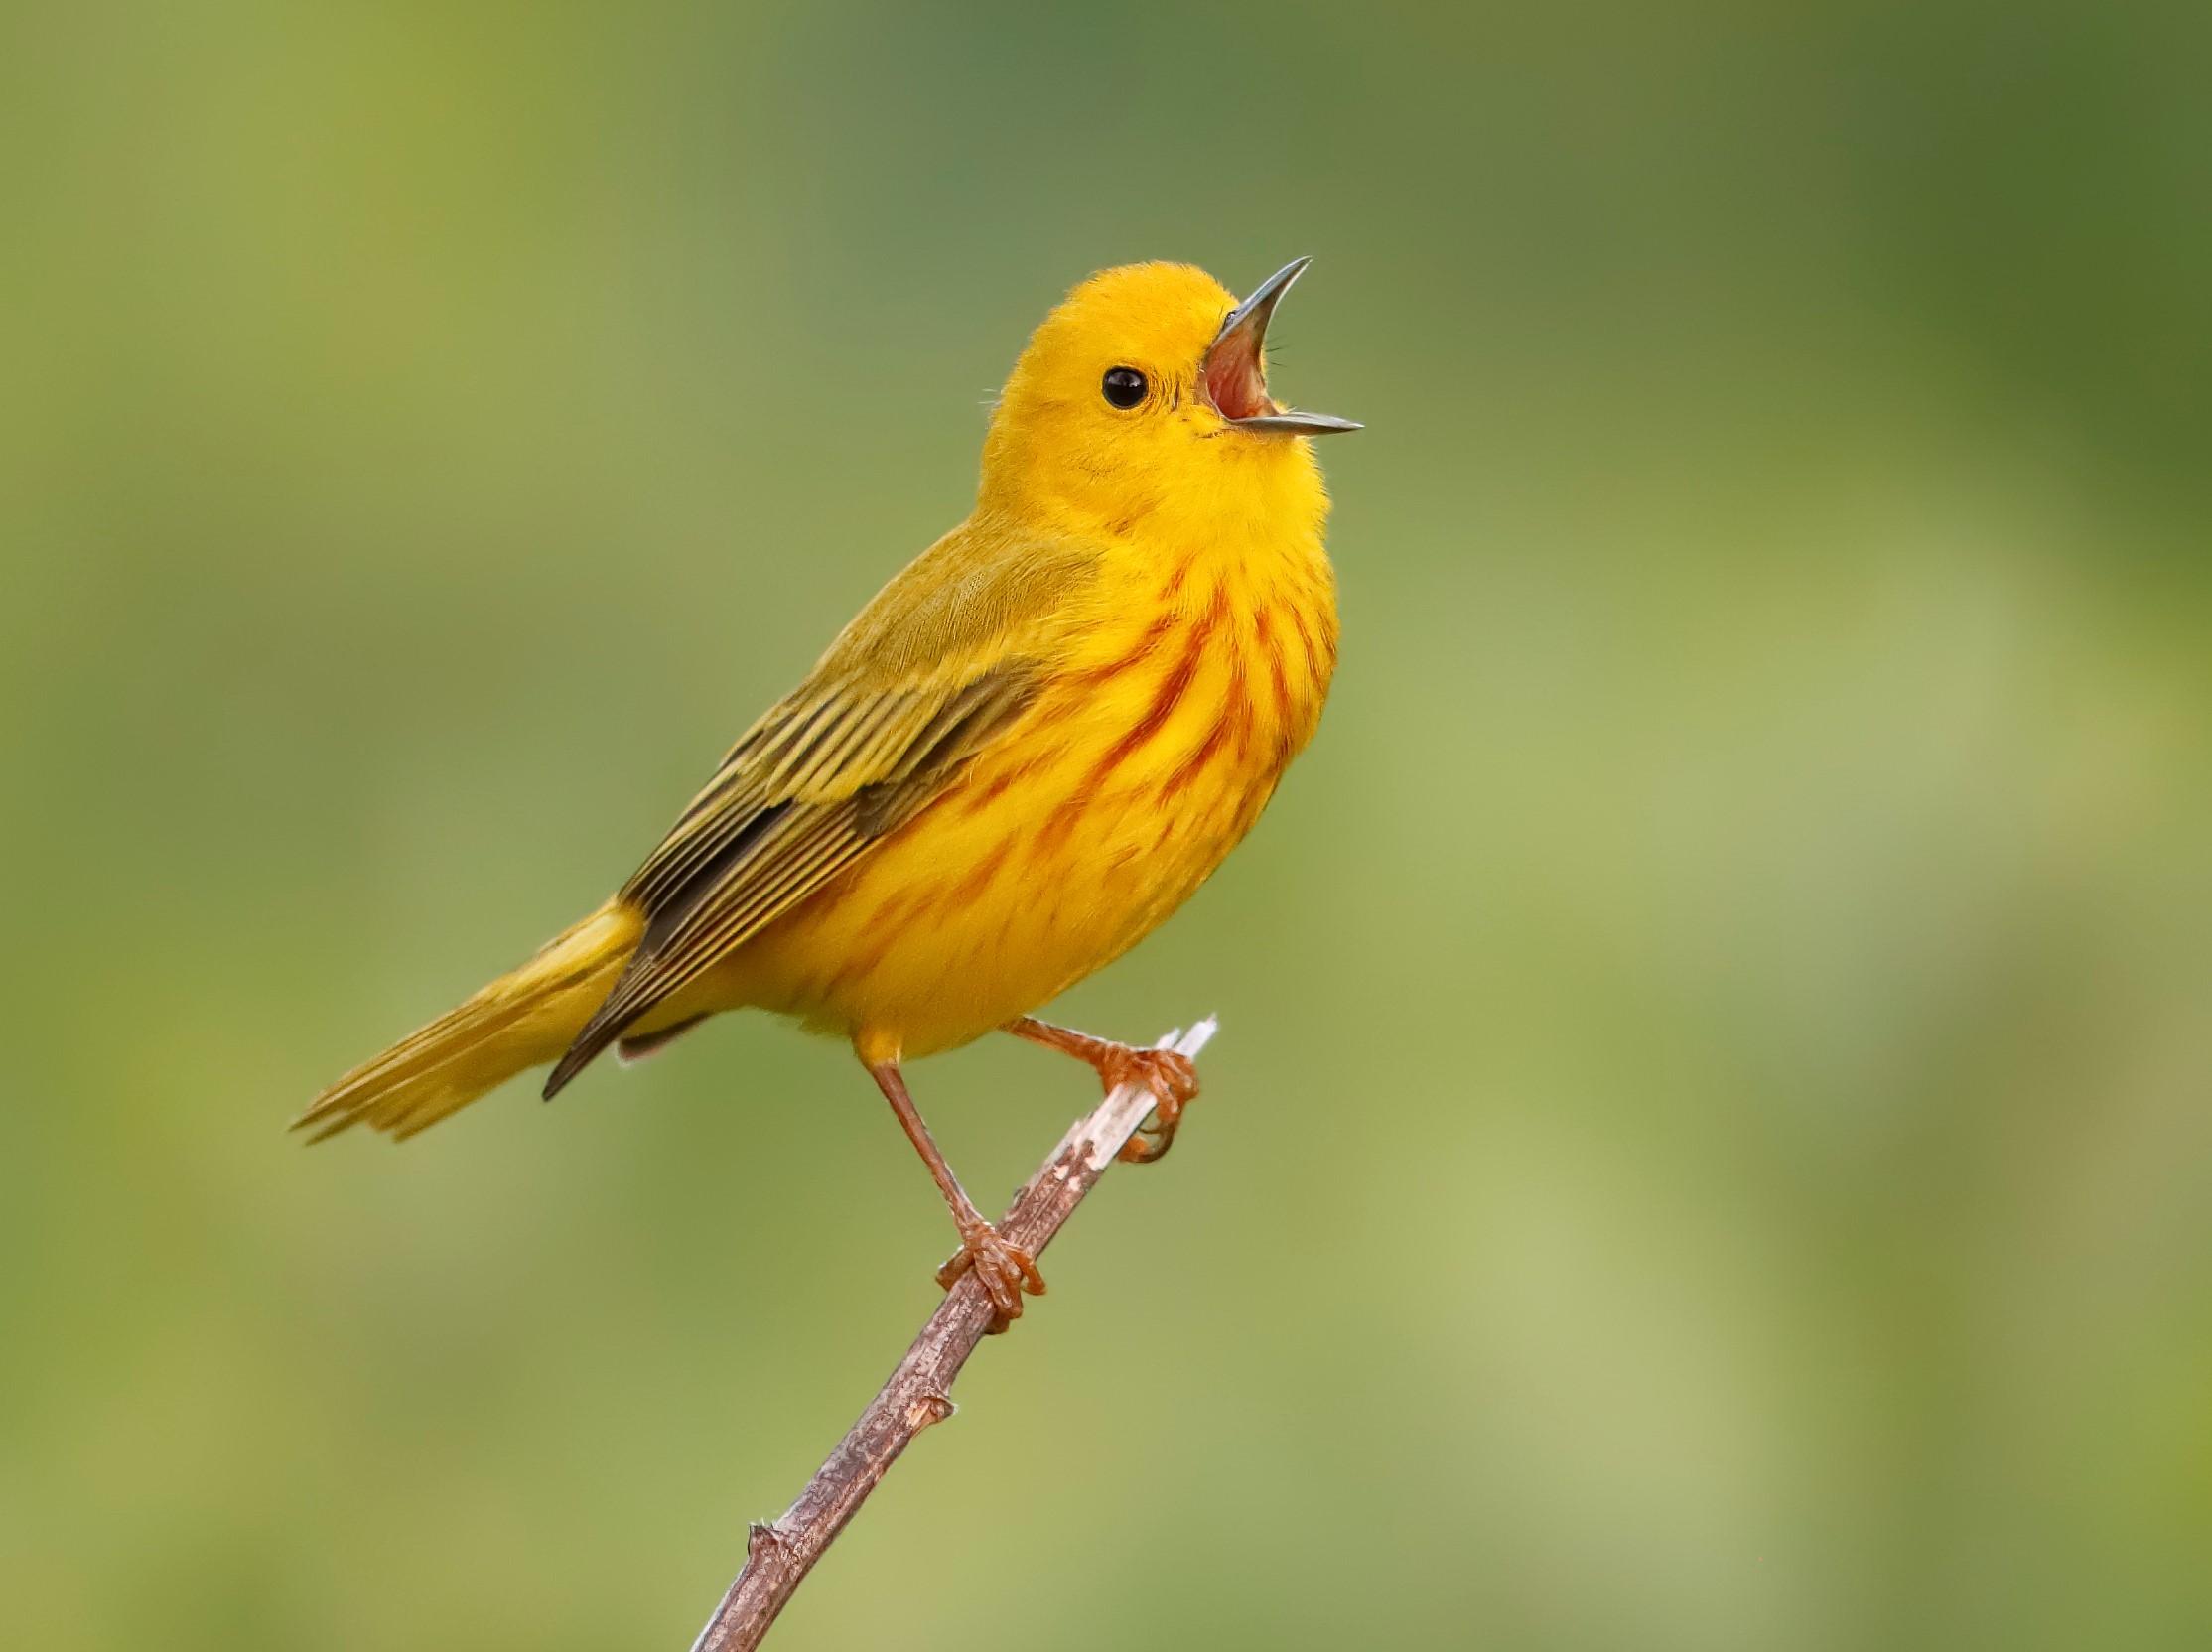 The \"sweet-sweet-I`m-so-sweet\" song of the Yellow Warbler can be heard in Heritage Park. Photo: <a href=\"https://www.flickr.com/photos/120553232@N02/\" target=\"_blank\" >Isaac Grant</a>